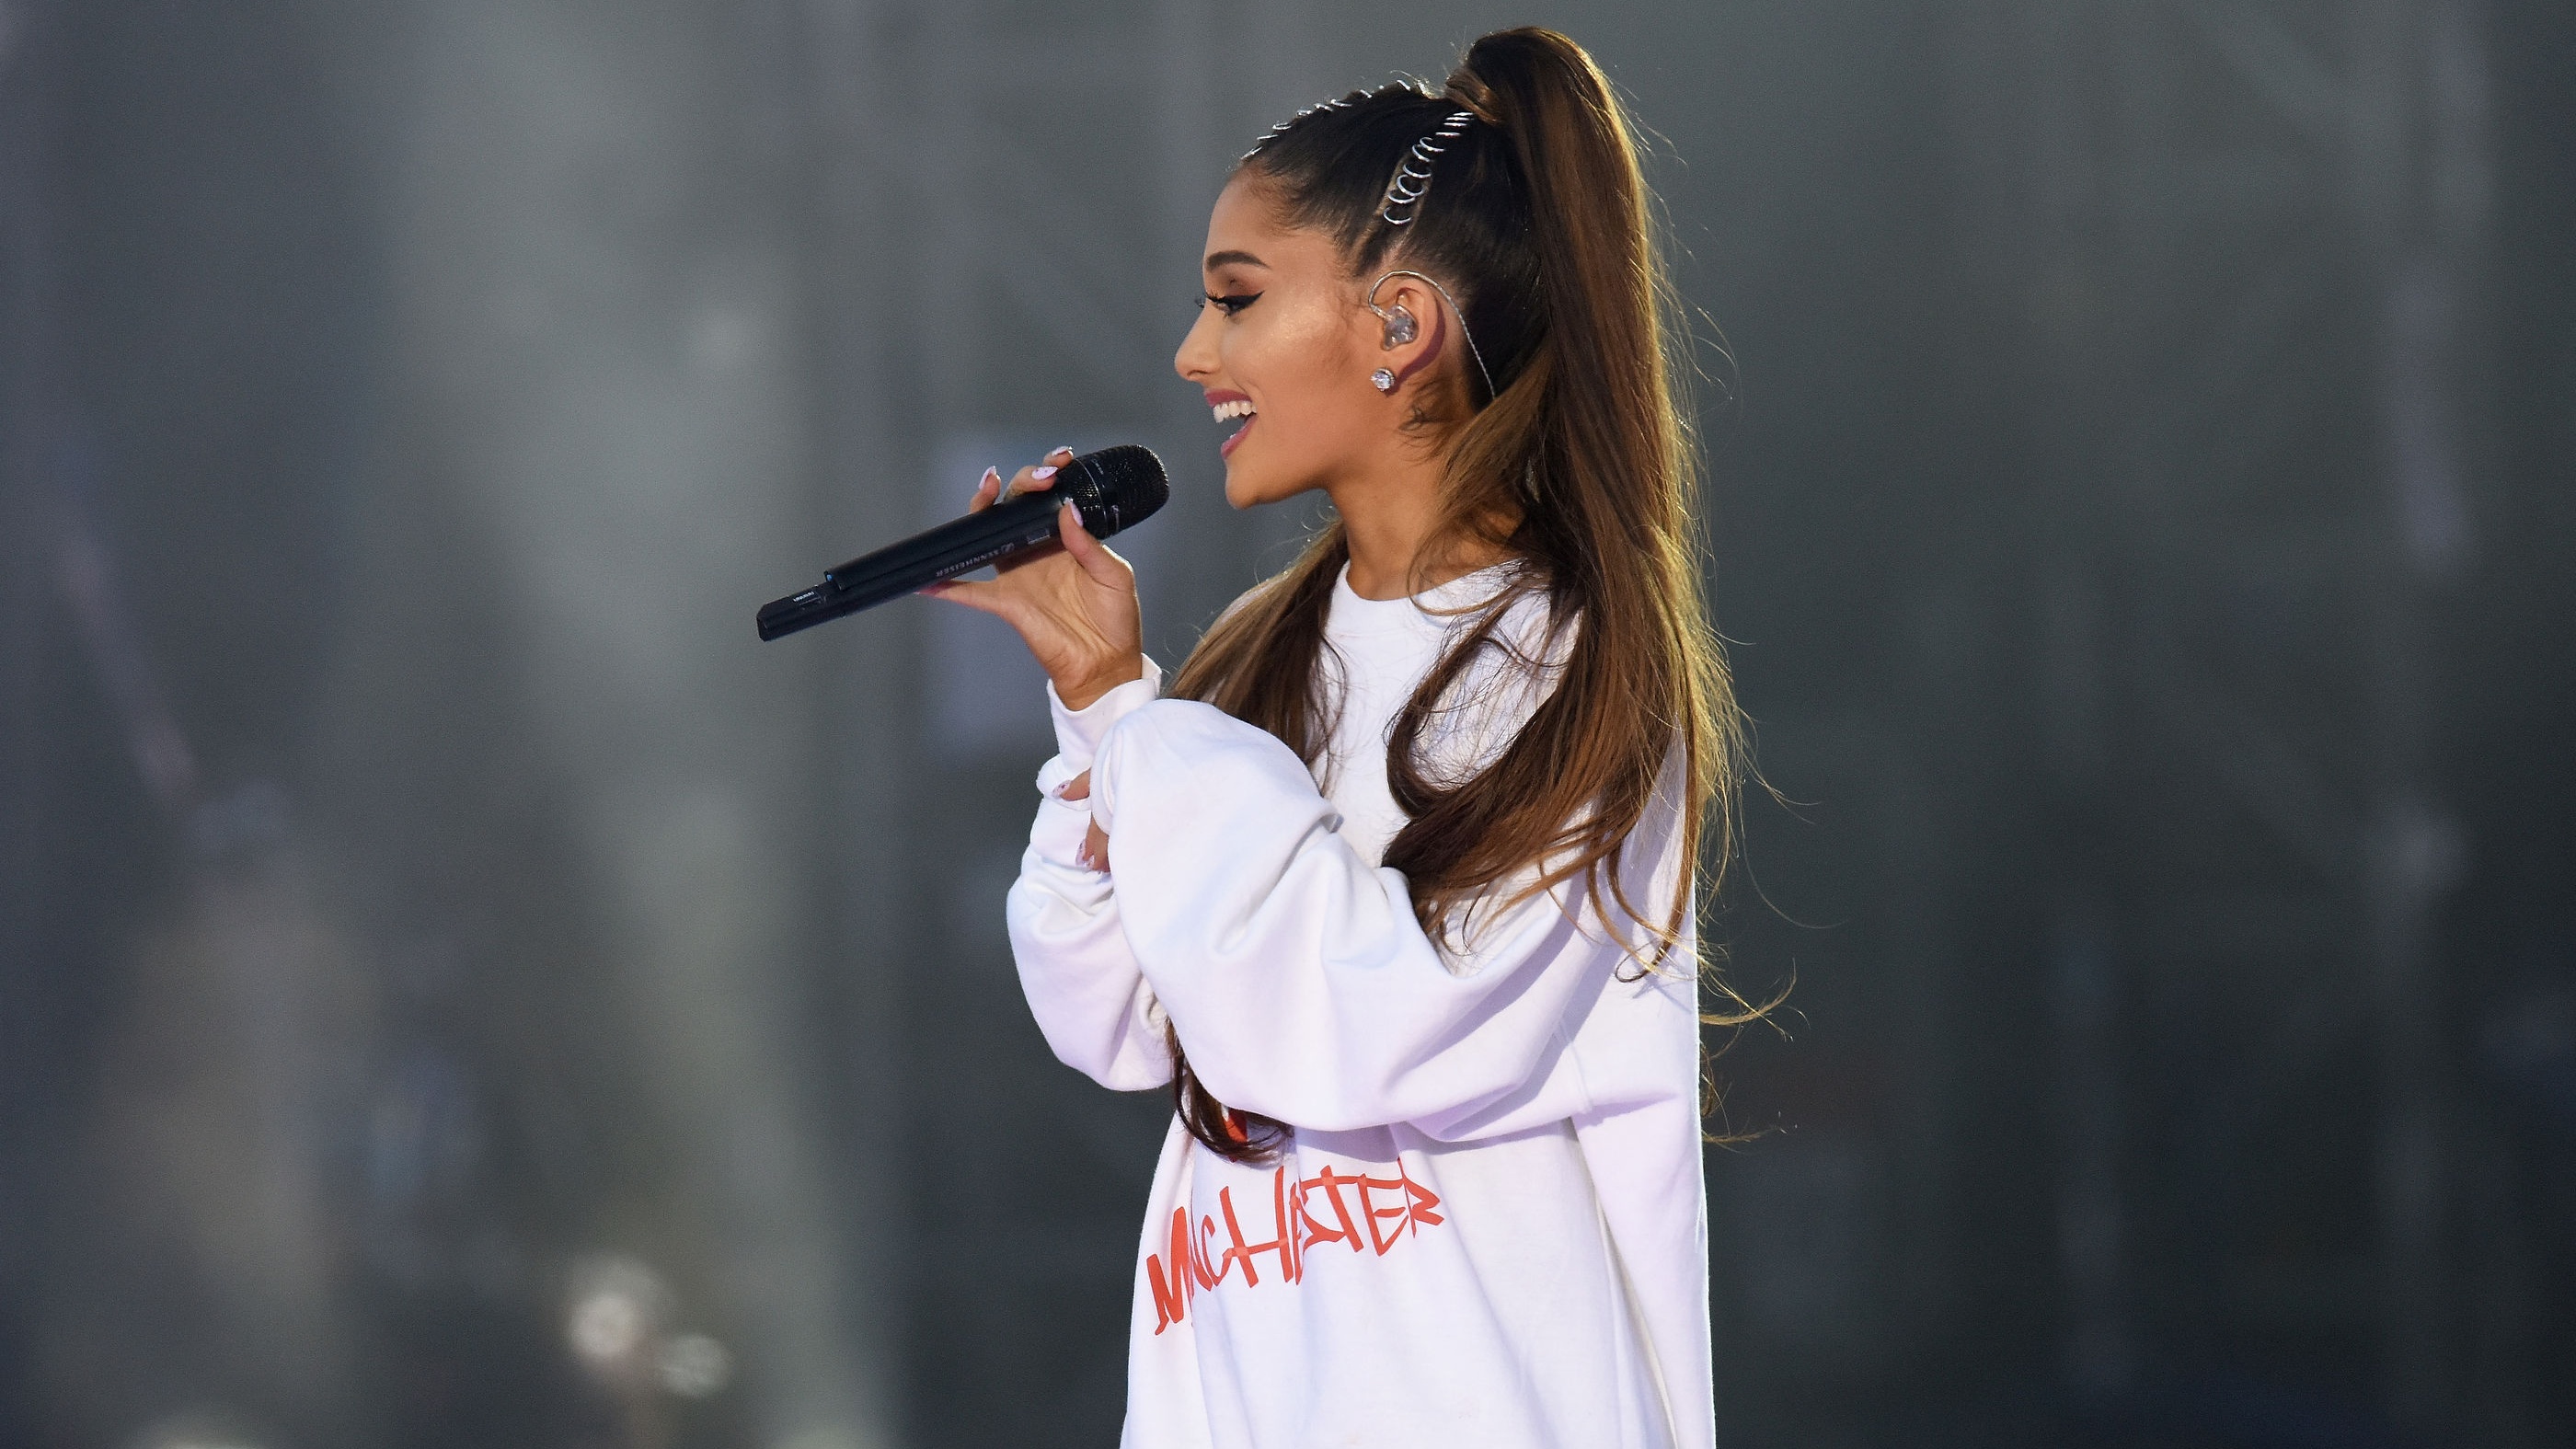 Ariana Grande performs at the One Love Manchester concert (Dave Hogan for One Love Manchester/PA)